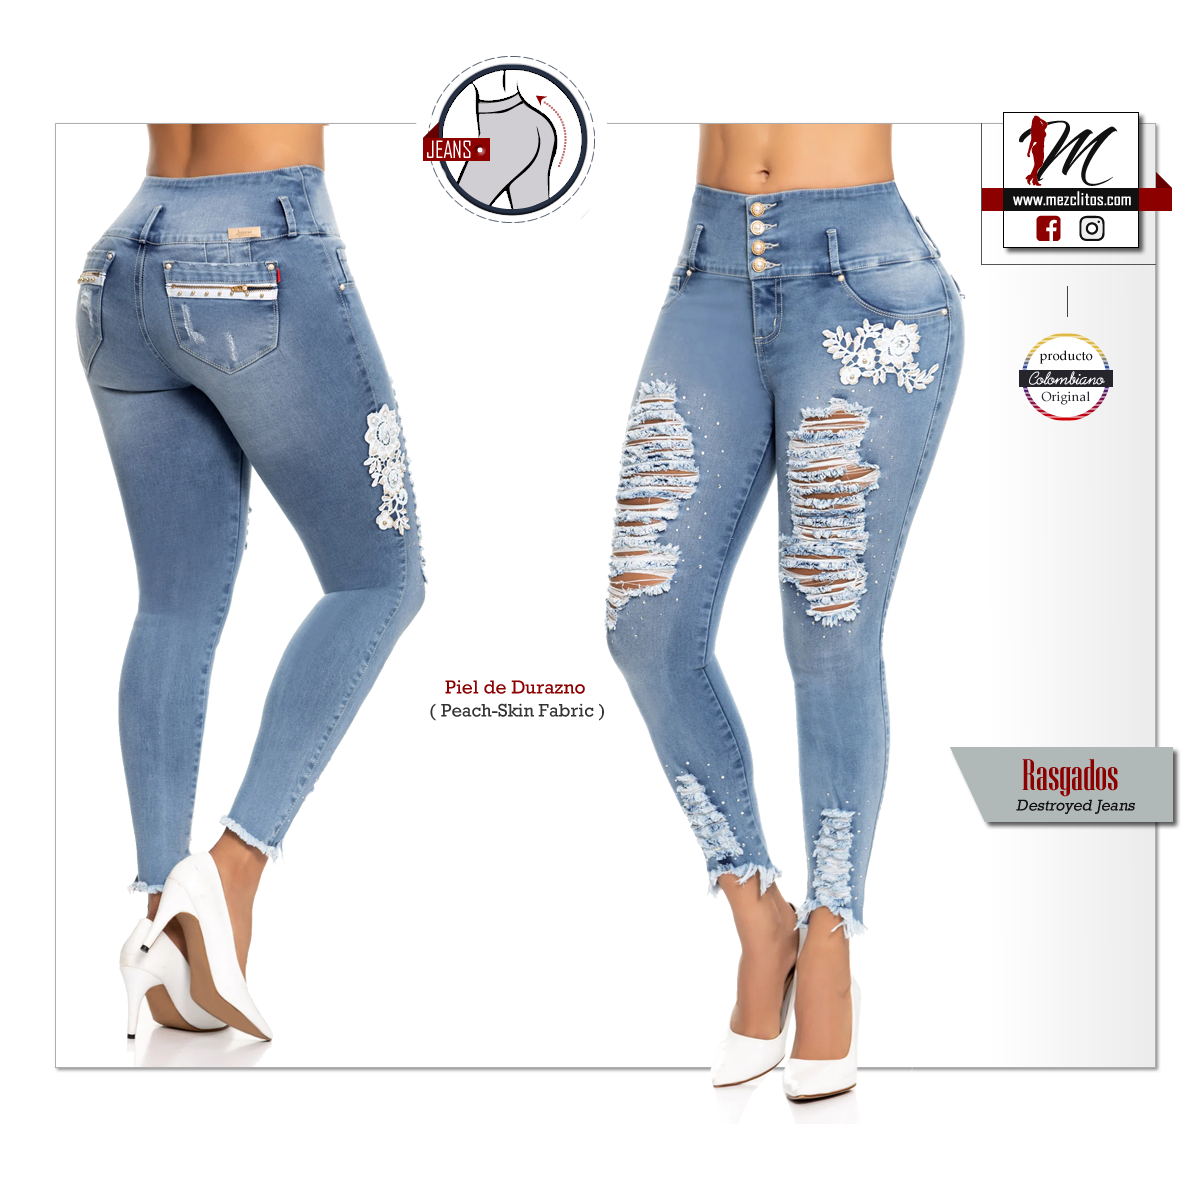 Ripley - JEANS COLOMBIANO 8410